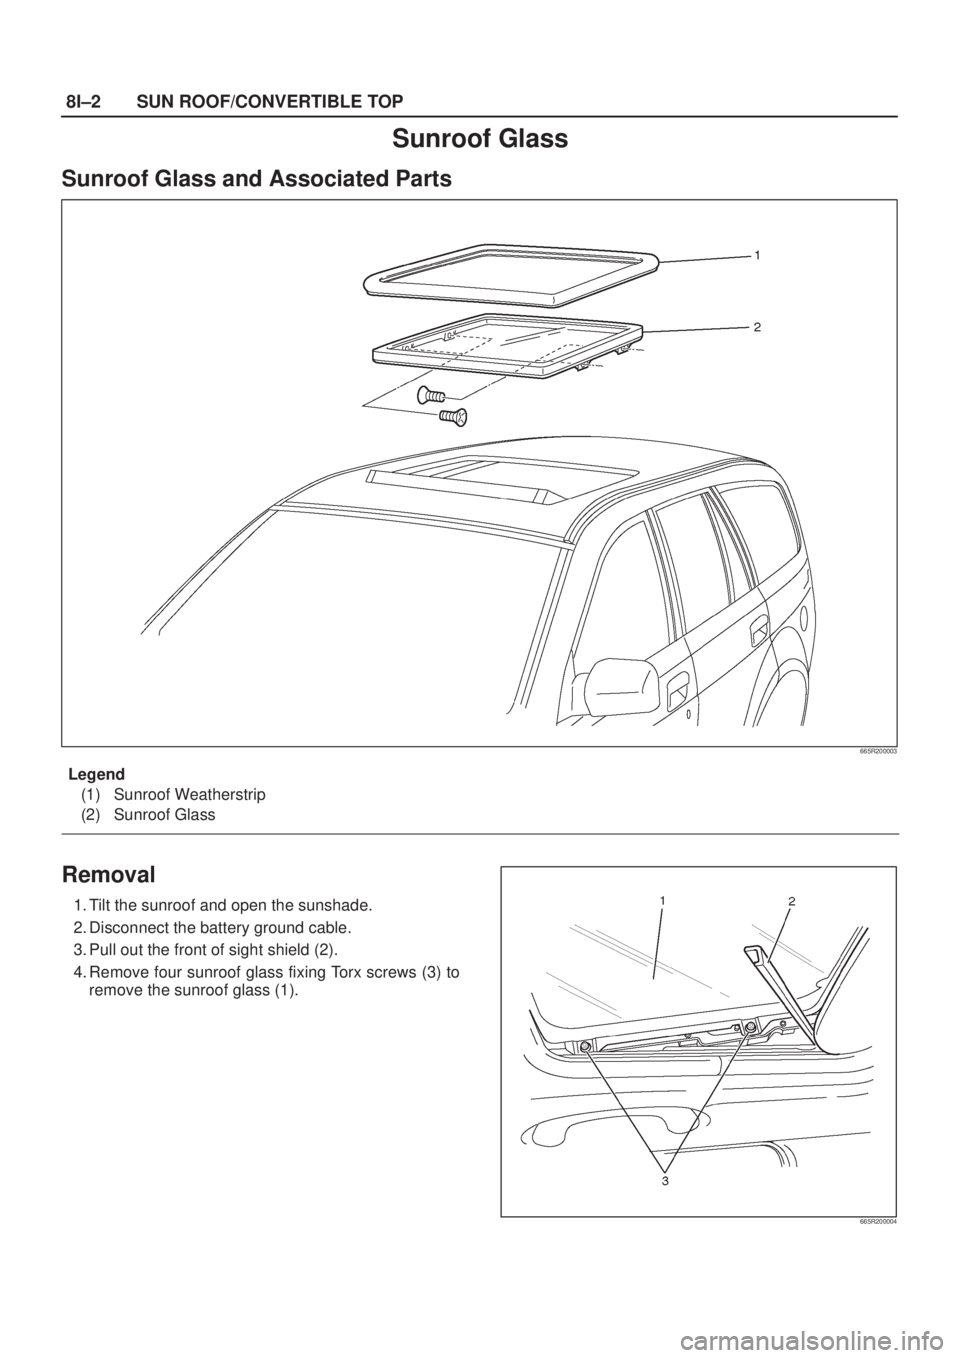 ISUZU AXIOM 2002  Service Repair Manual 8I±2SUN ROOF/CONVERTIBLE TOP
Sunroof Glass
Sunroof Glass and Associated Parts
665R200003
Legend
(1) Sunroof Weatherstrip
(2) Sunroof Glass
Removal
1. Tilt the sunroof and open the sunshade.
2. Discon